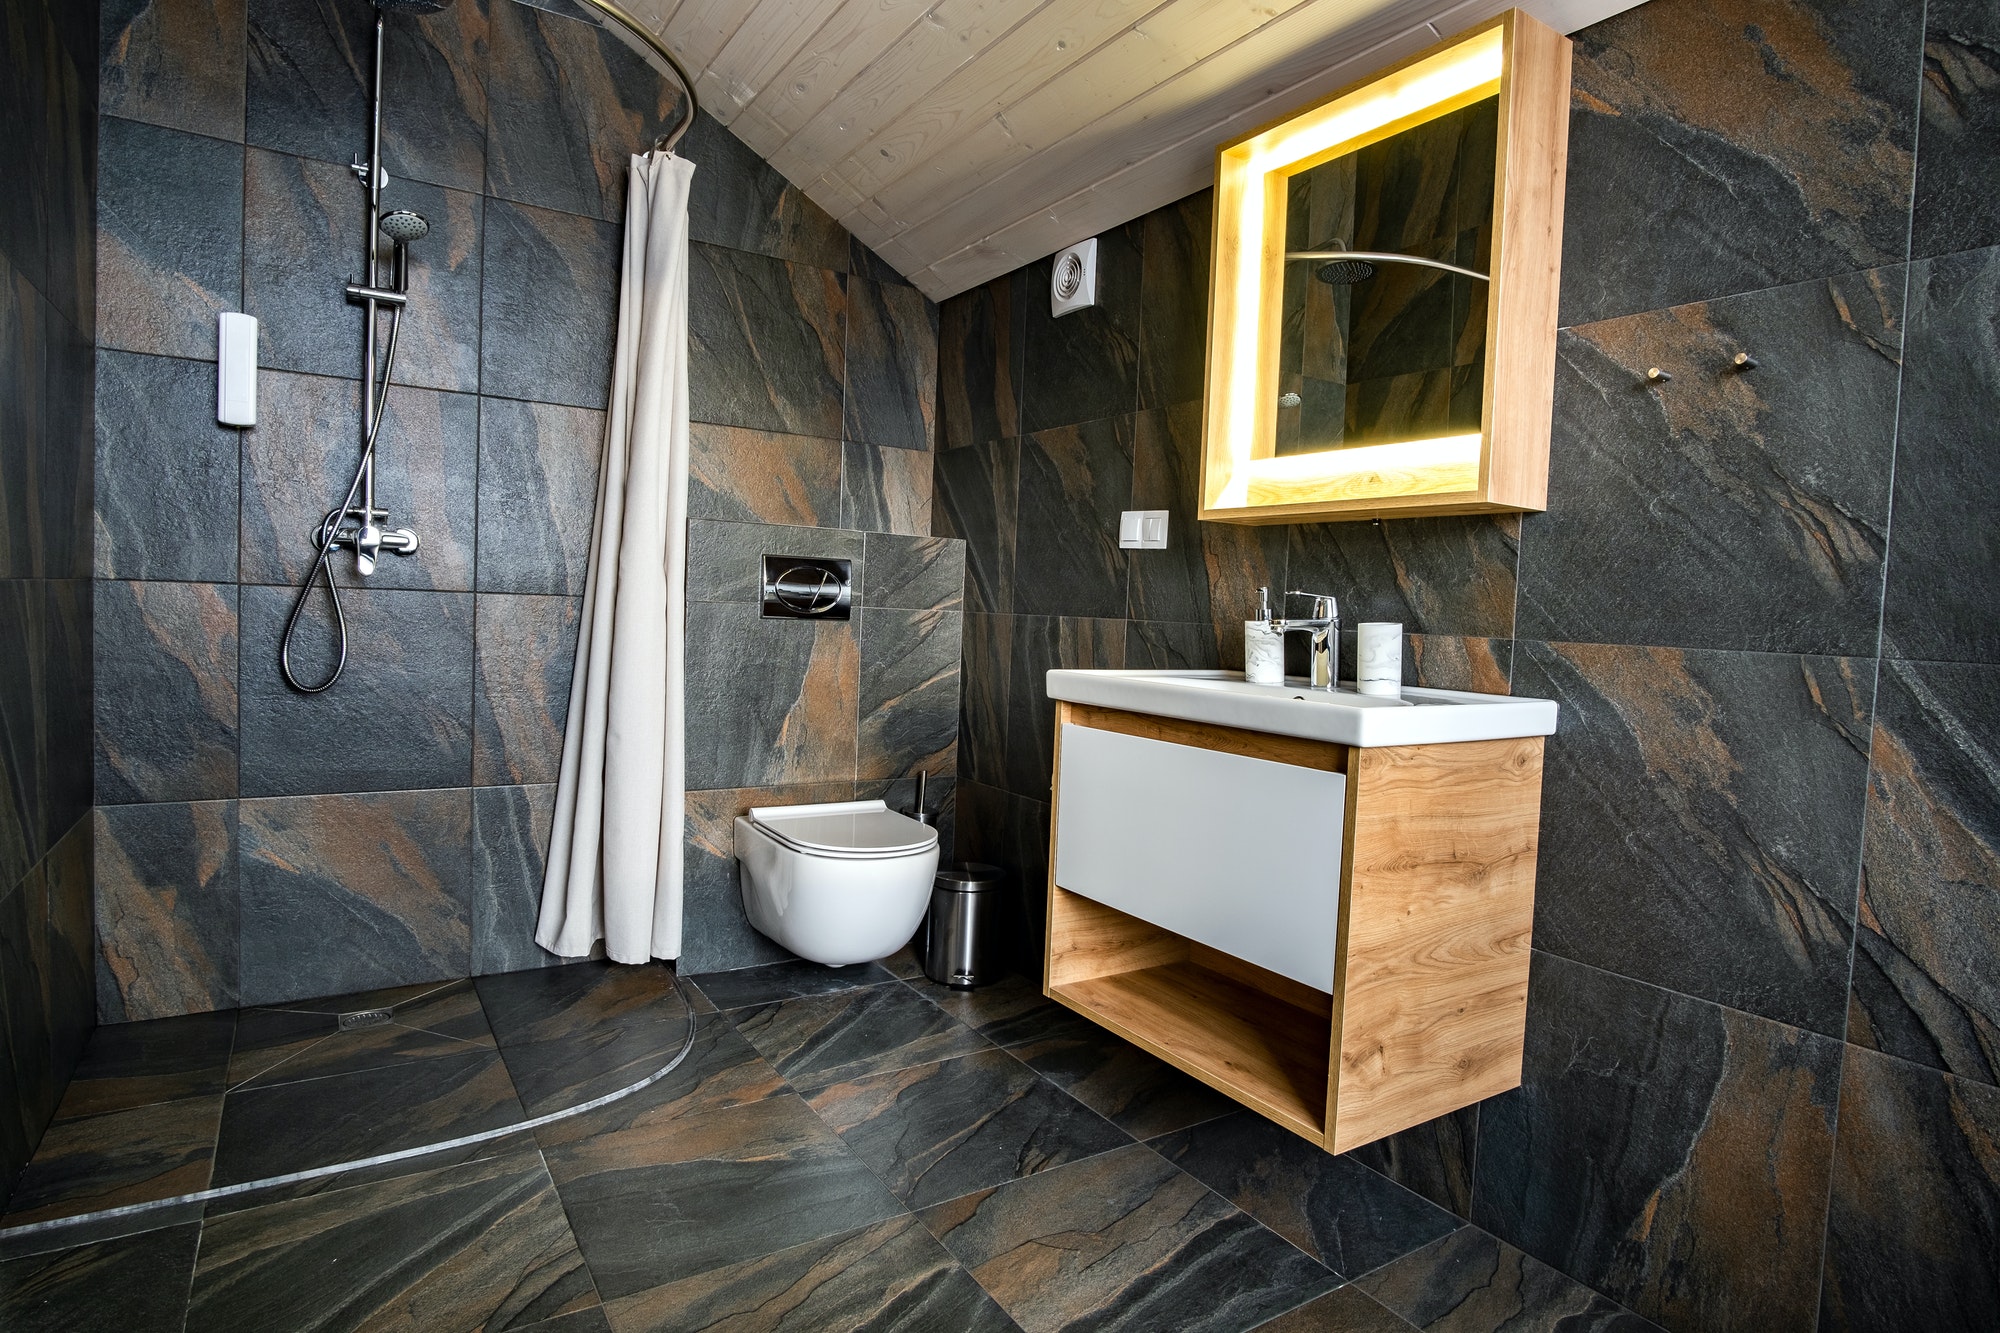 Interior of modern stylish bathroom with black tiled walls, curtain shower place and wooden